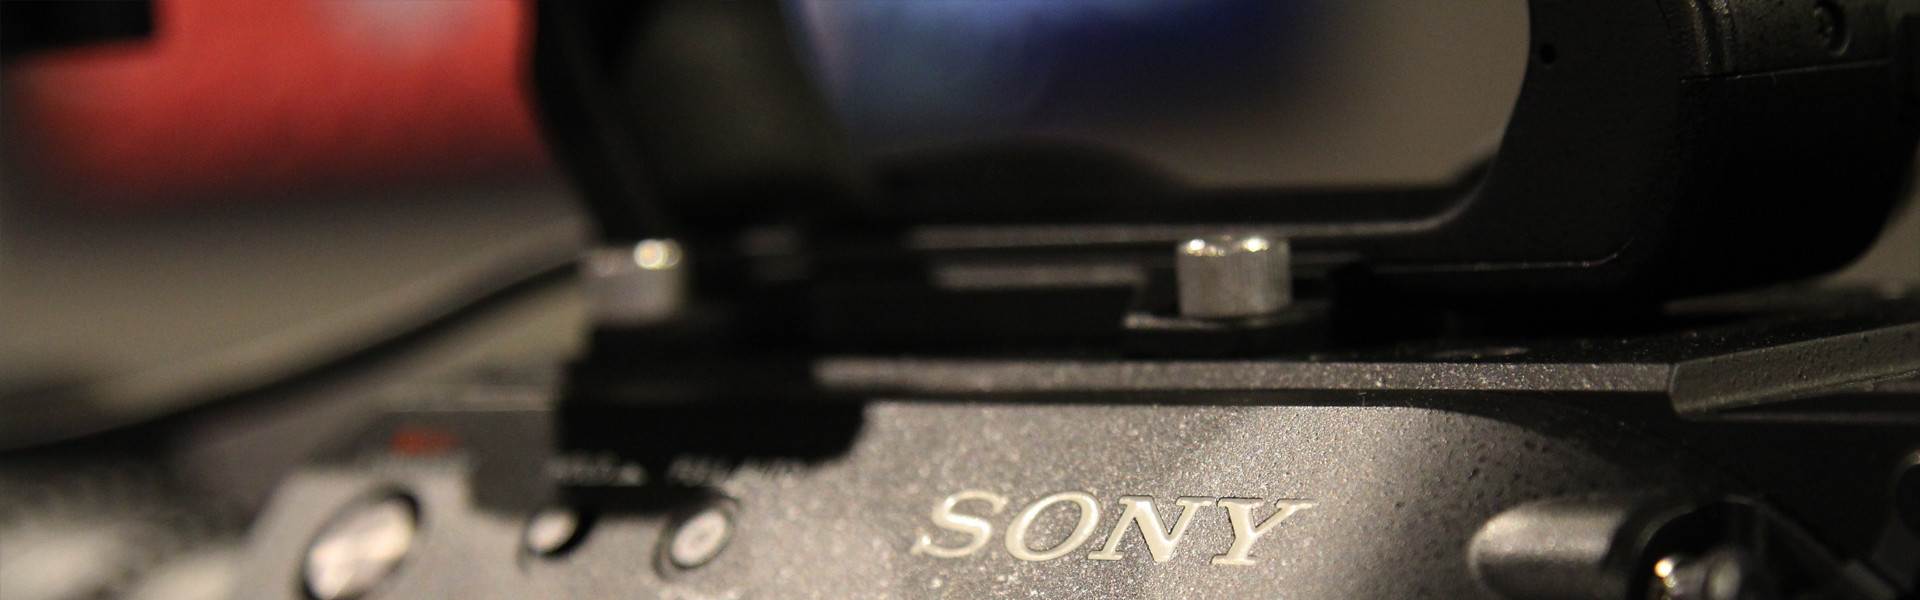 Header image for article How to Auto White Balance Your Sony Monitor